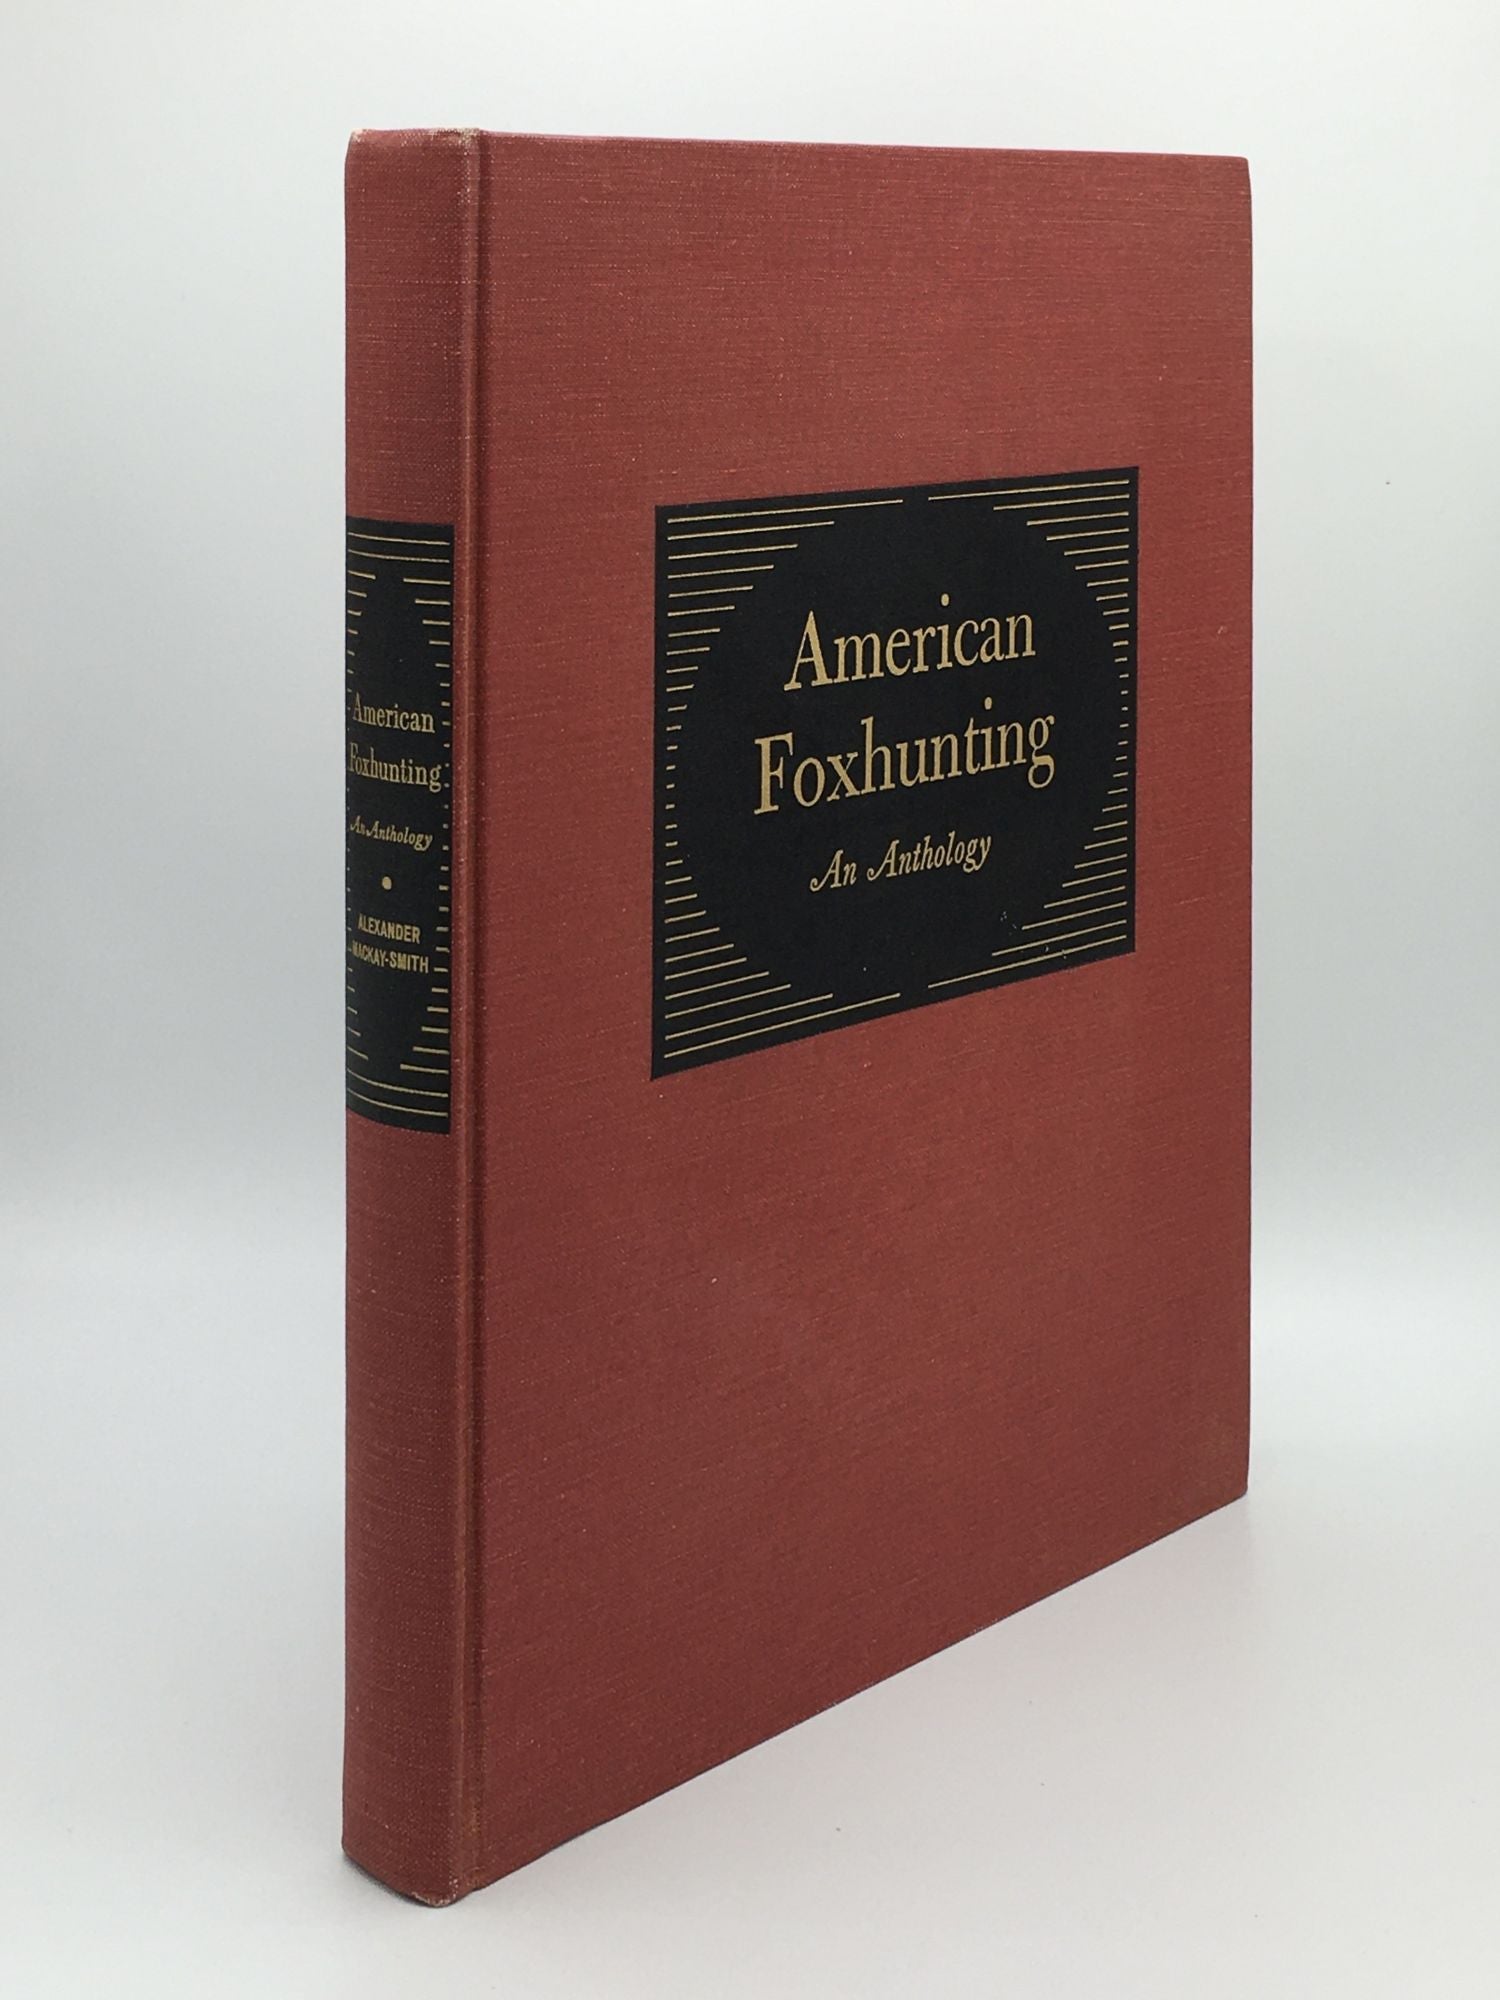 MACKAY-SMITH Alexander - American Foxhunting an Anthology